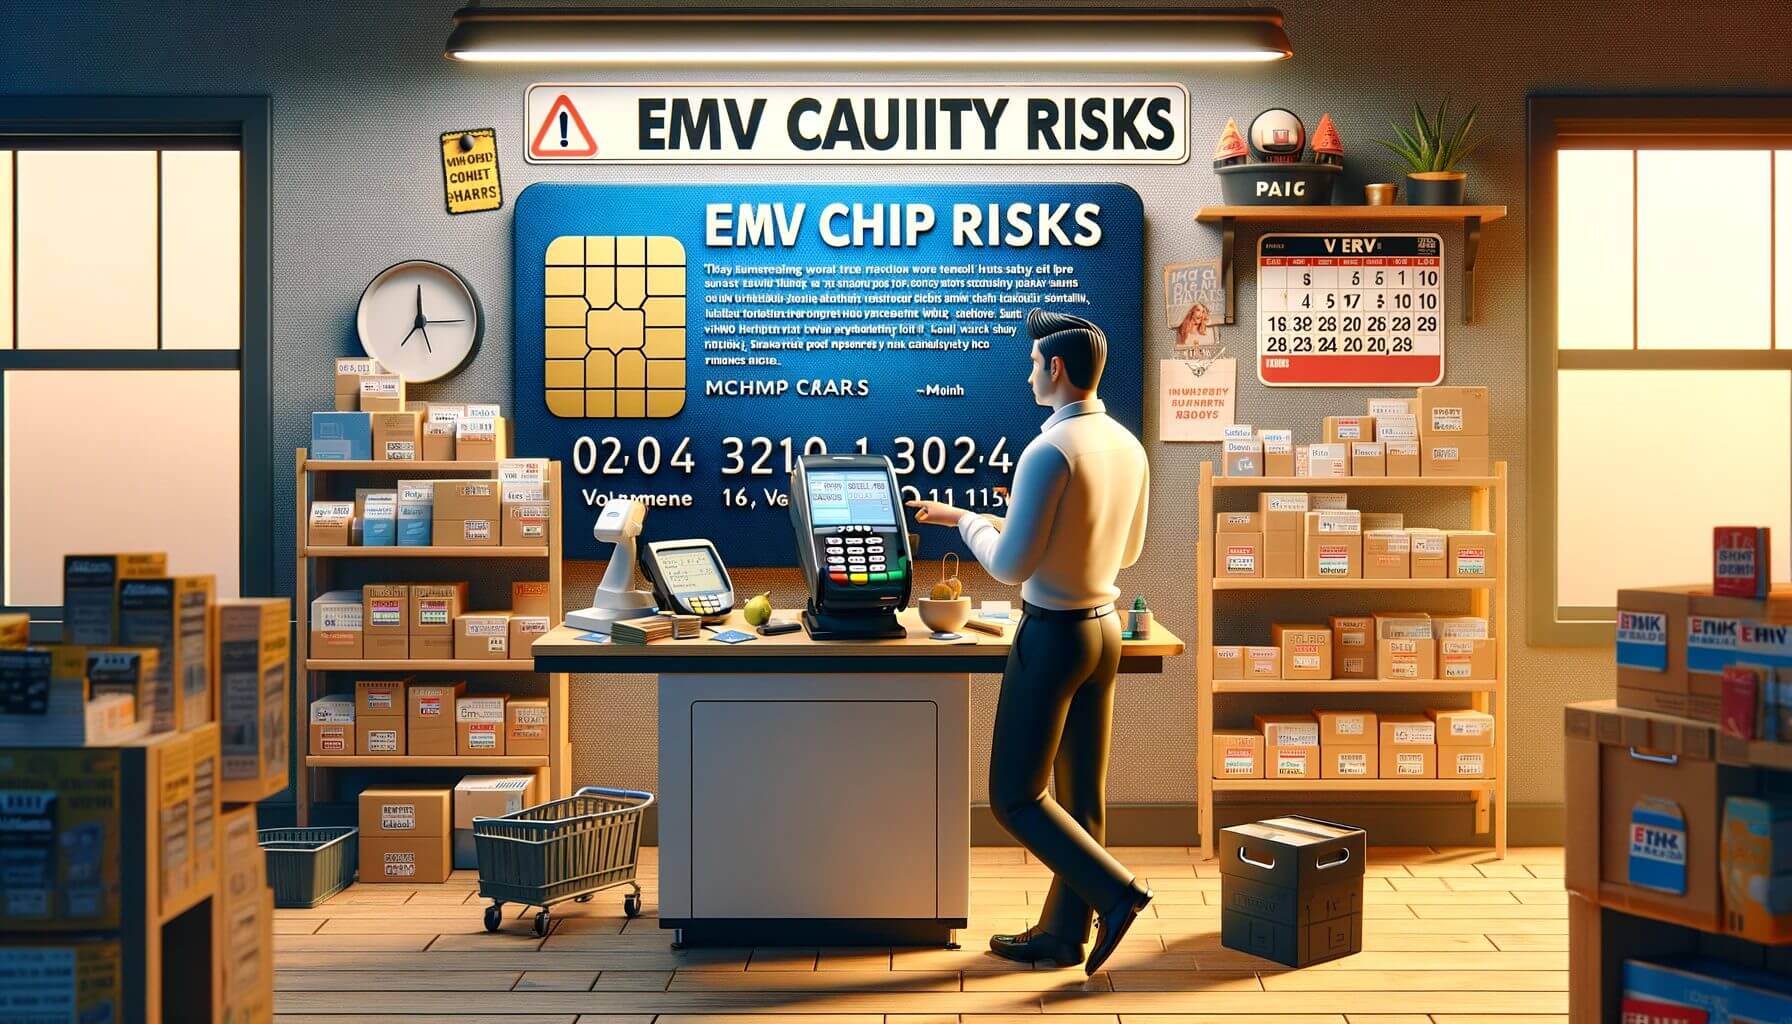 DALL·E-2024-01-25-21.53.05-Create-a-realistic-image-that-visualizes-the-concept-of-EMV-risks-for-merchants.-The-scene-should-depict-a-retail-store-with-a-merchant-examining-a-po